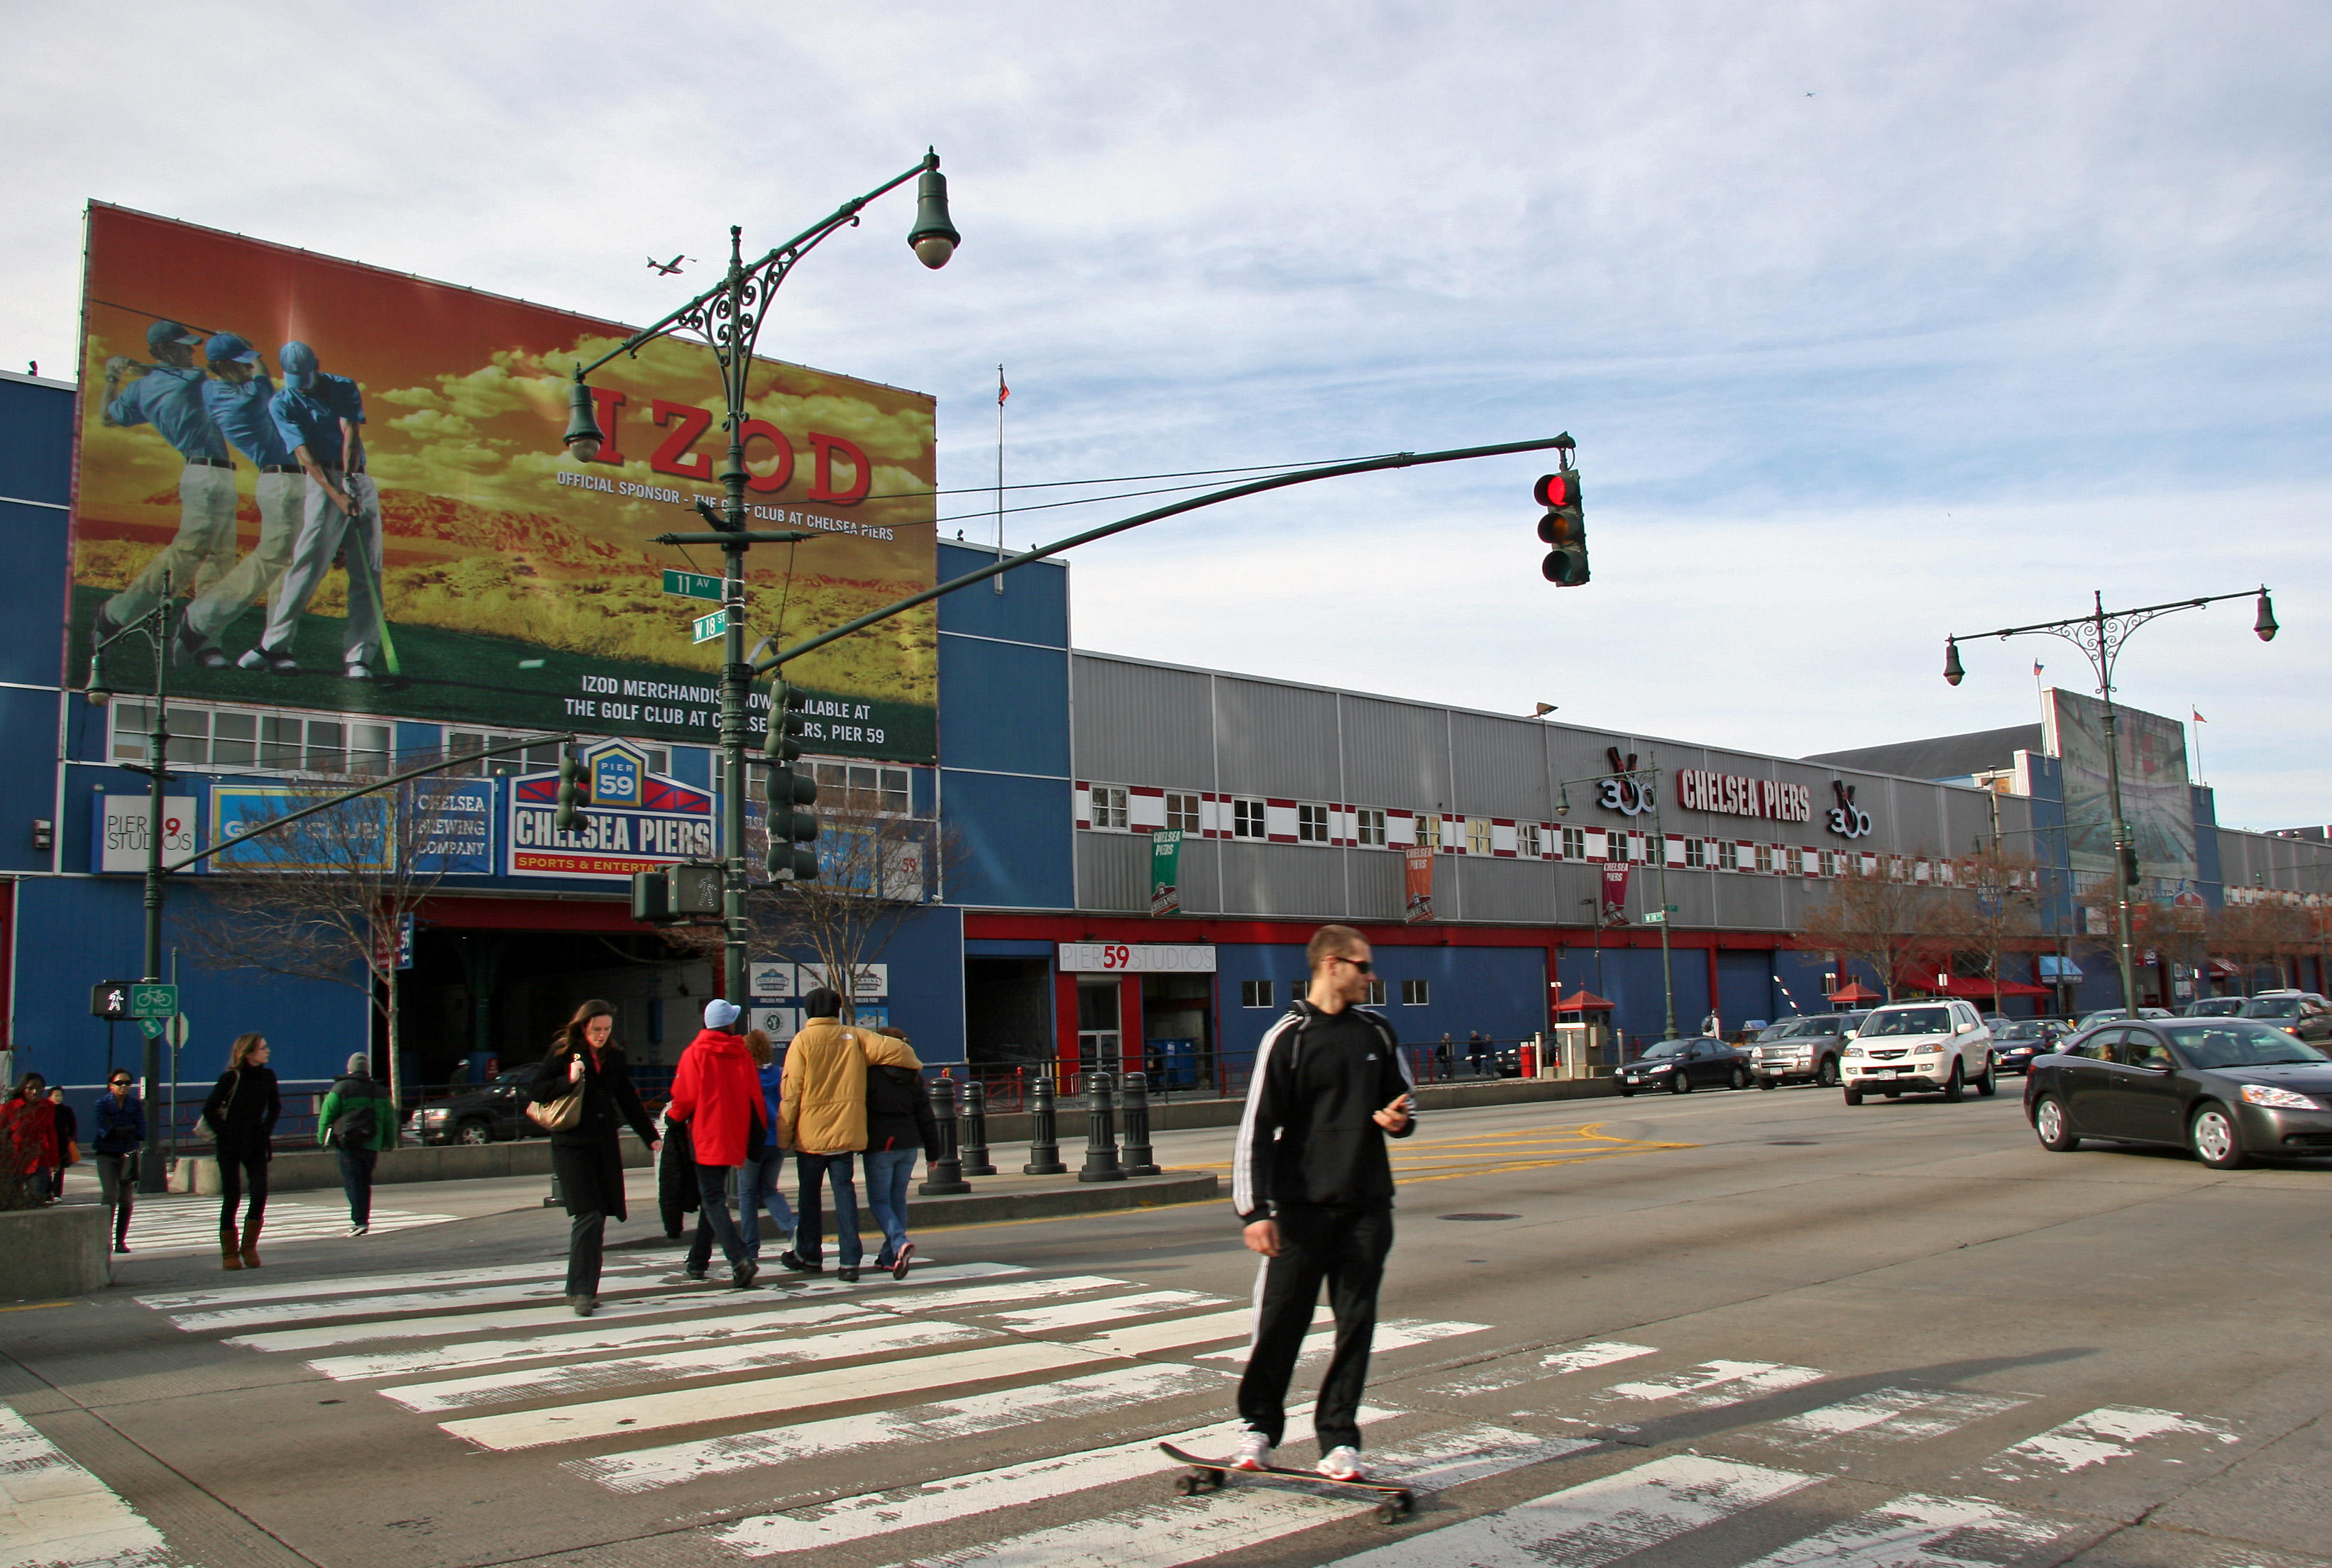 Chelsea Piers at 11th Avenue & 18th Street